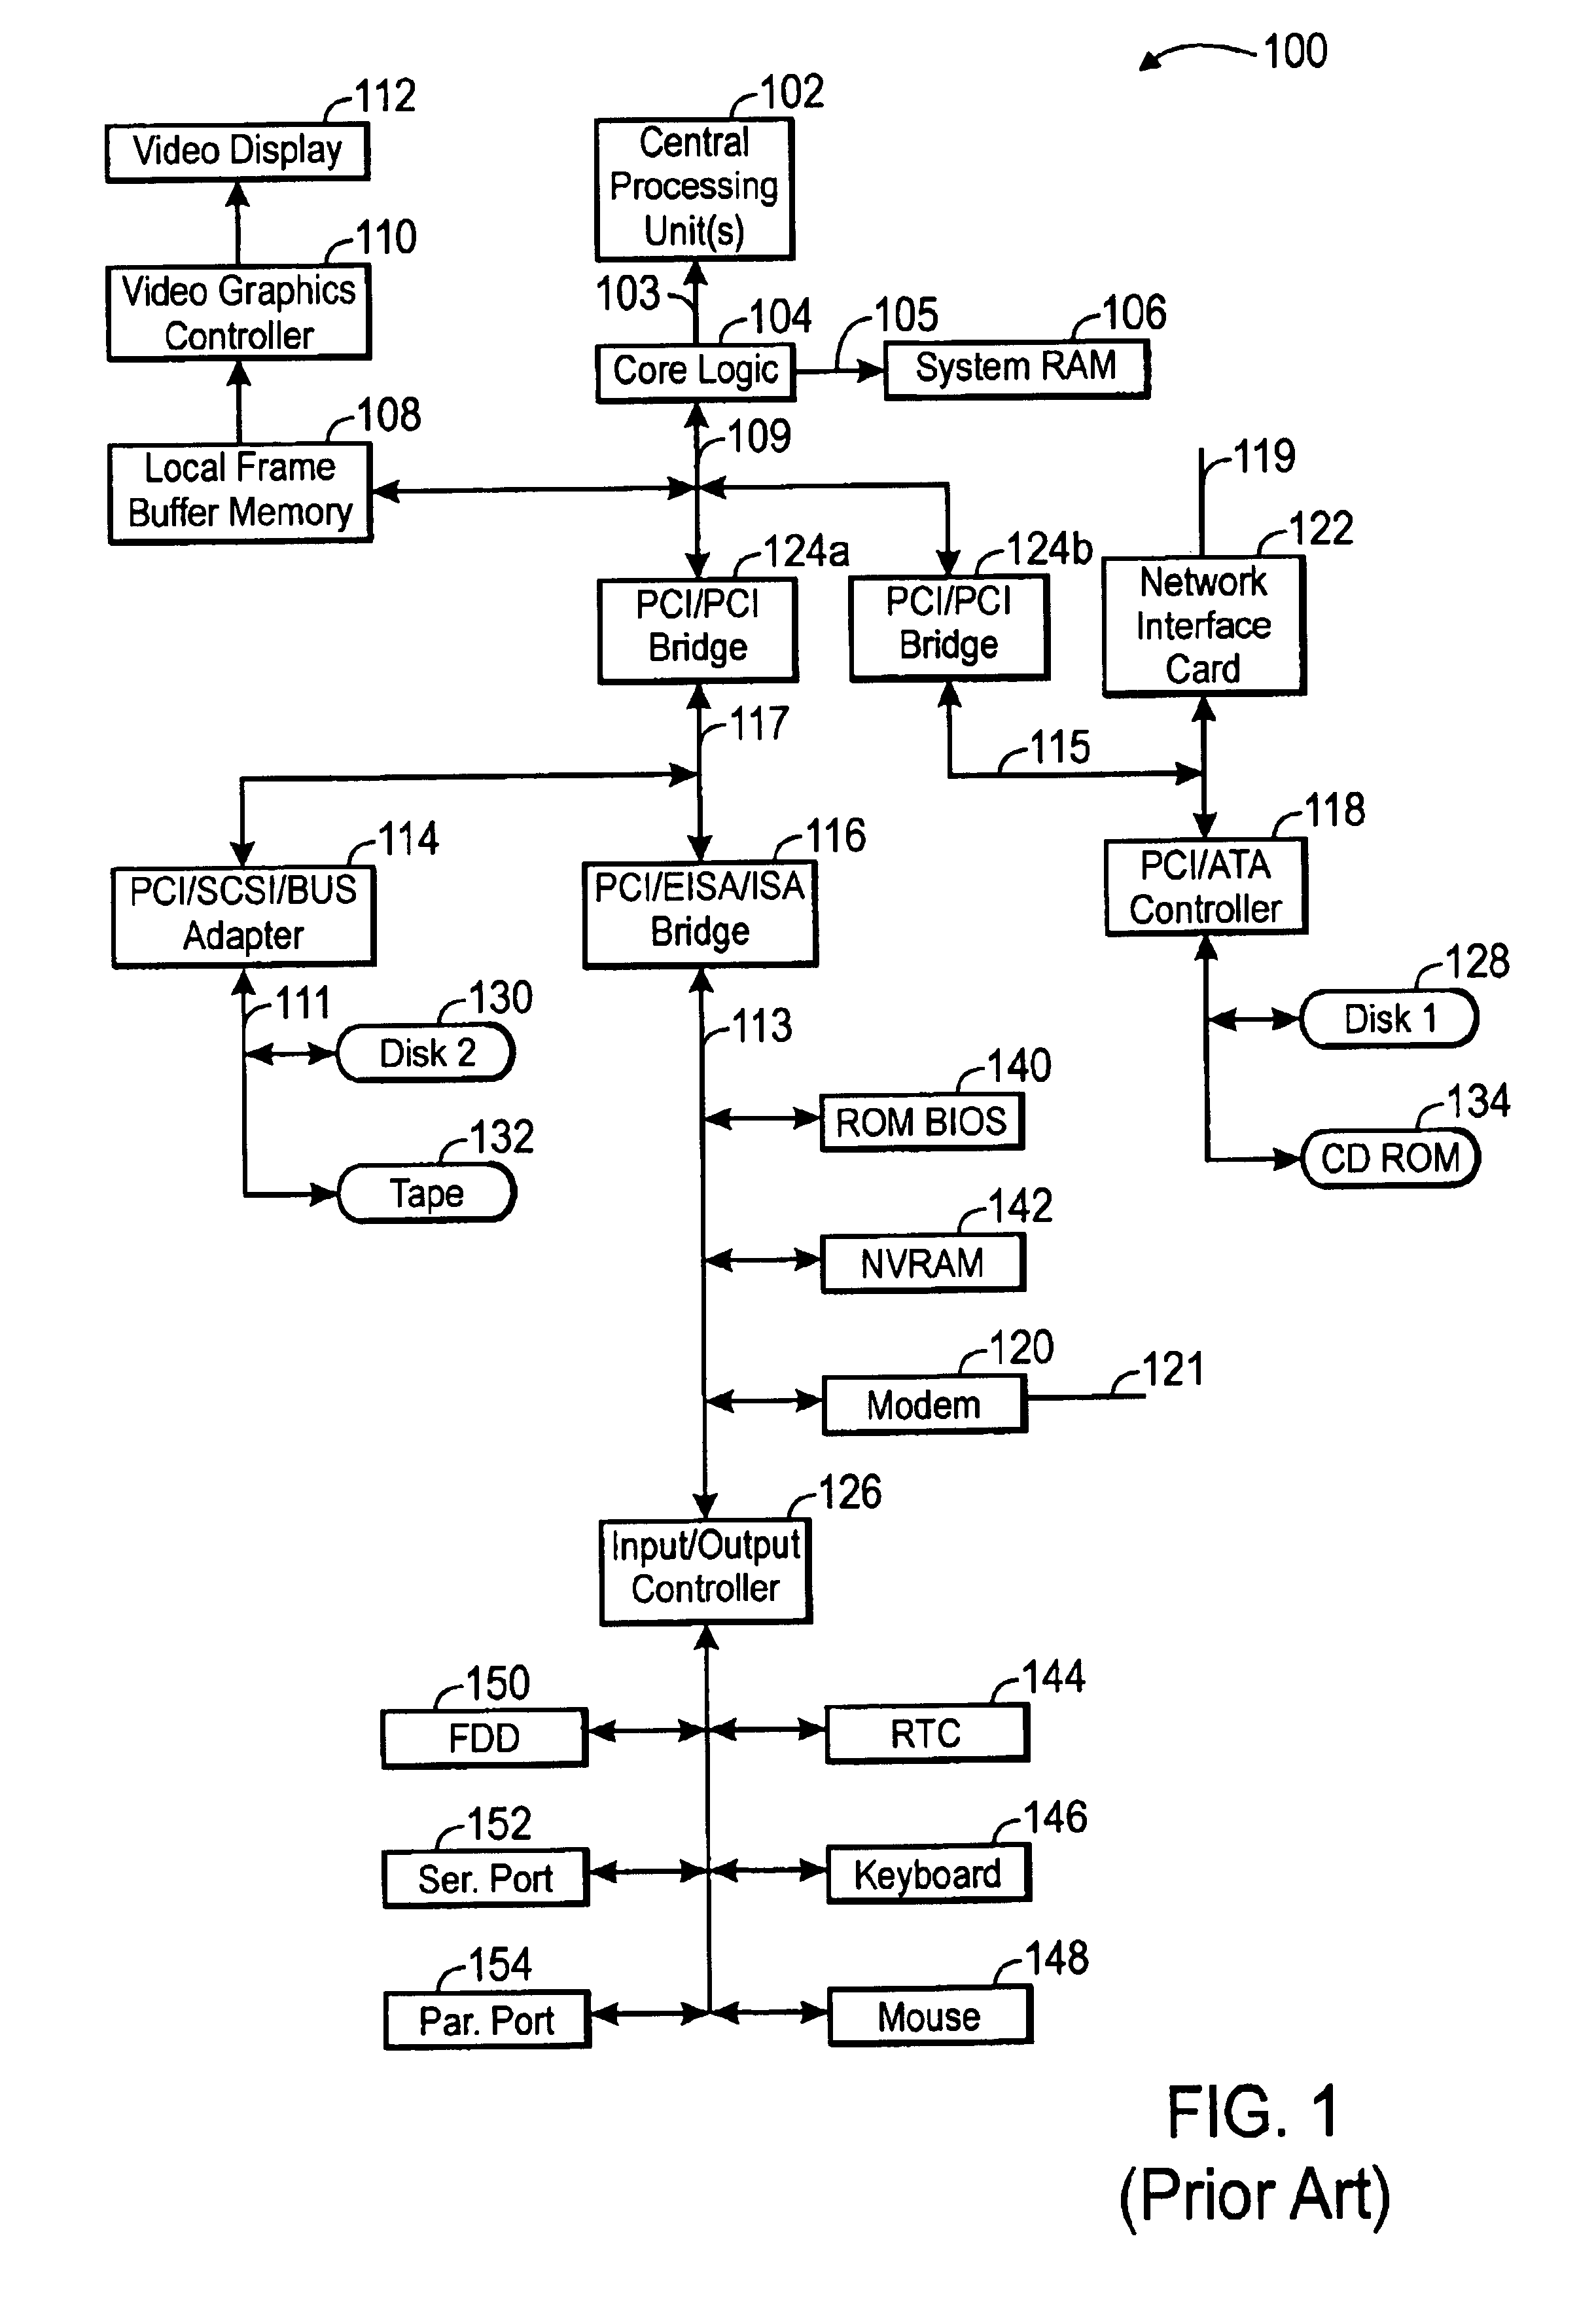 Computer CPU and memory to accelerated graphics port bridge having a plurality of physical buses with a single logical bus number